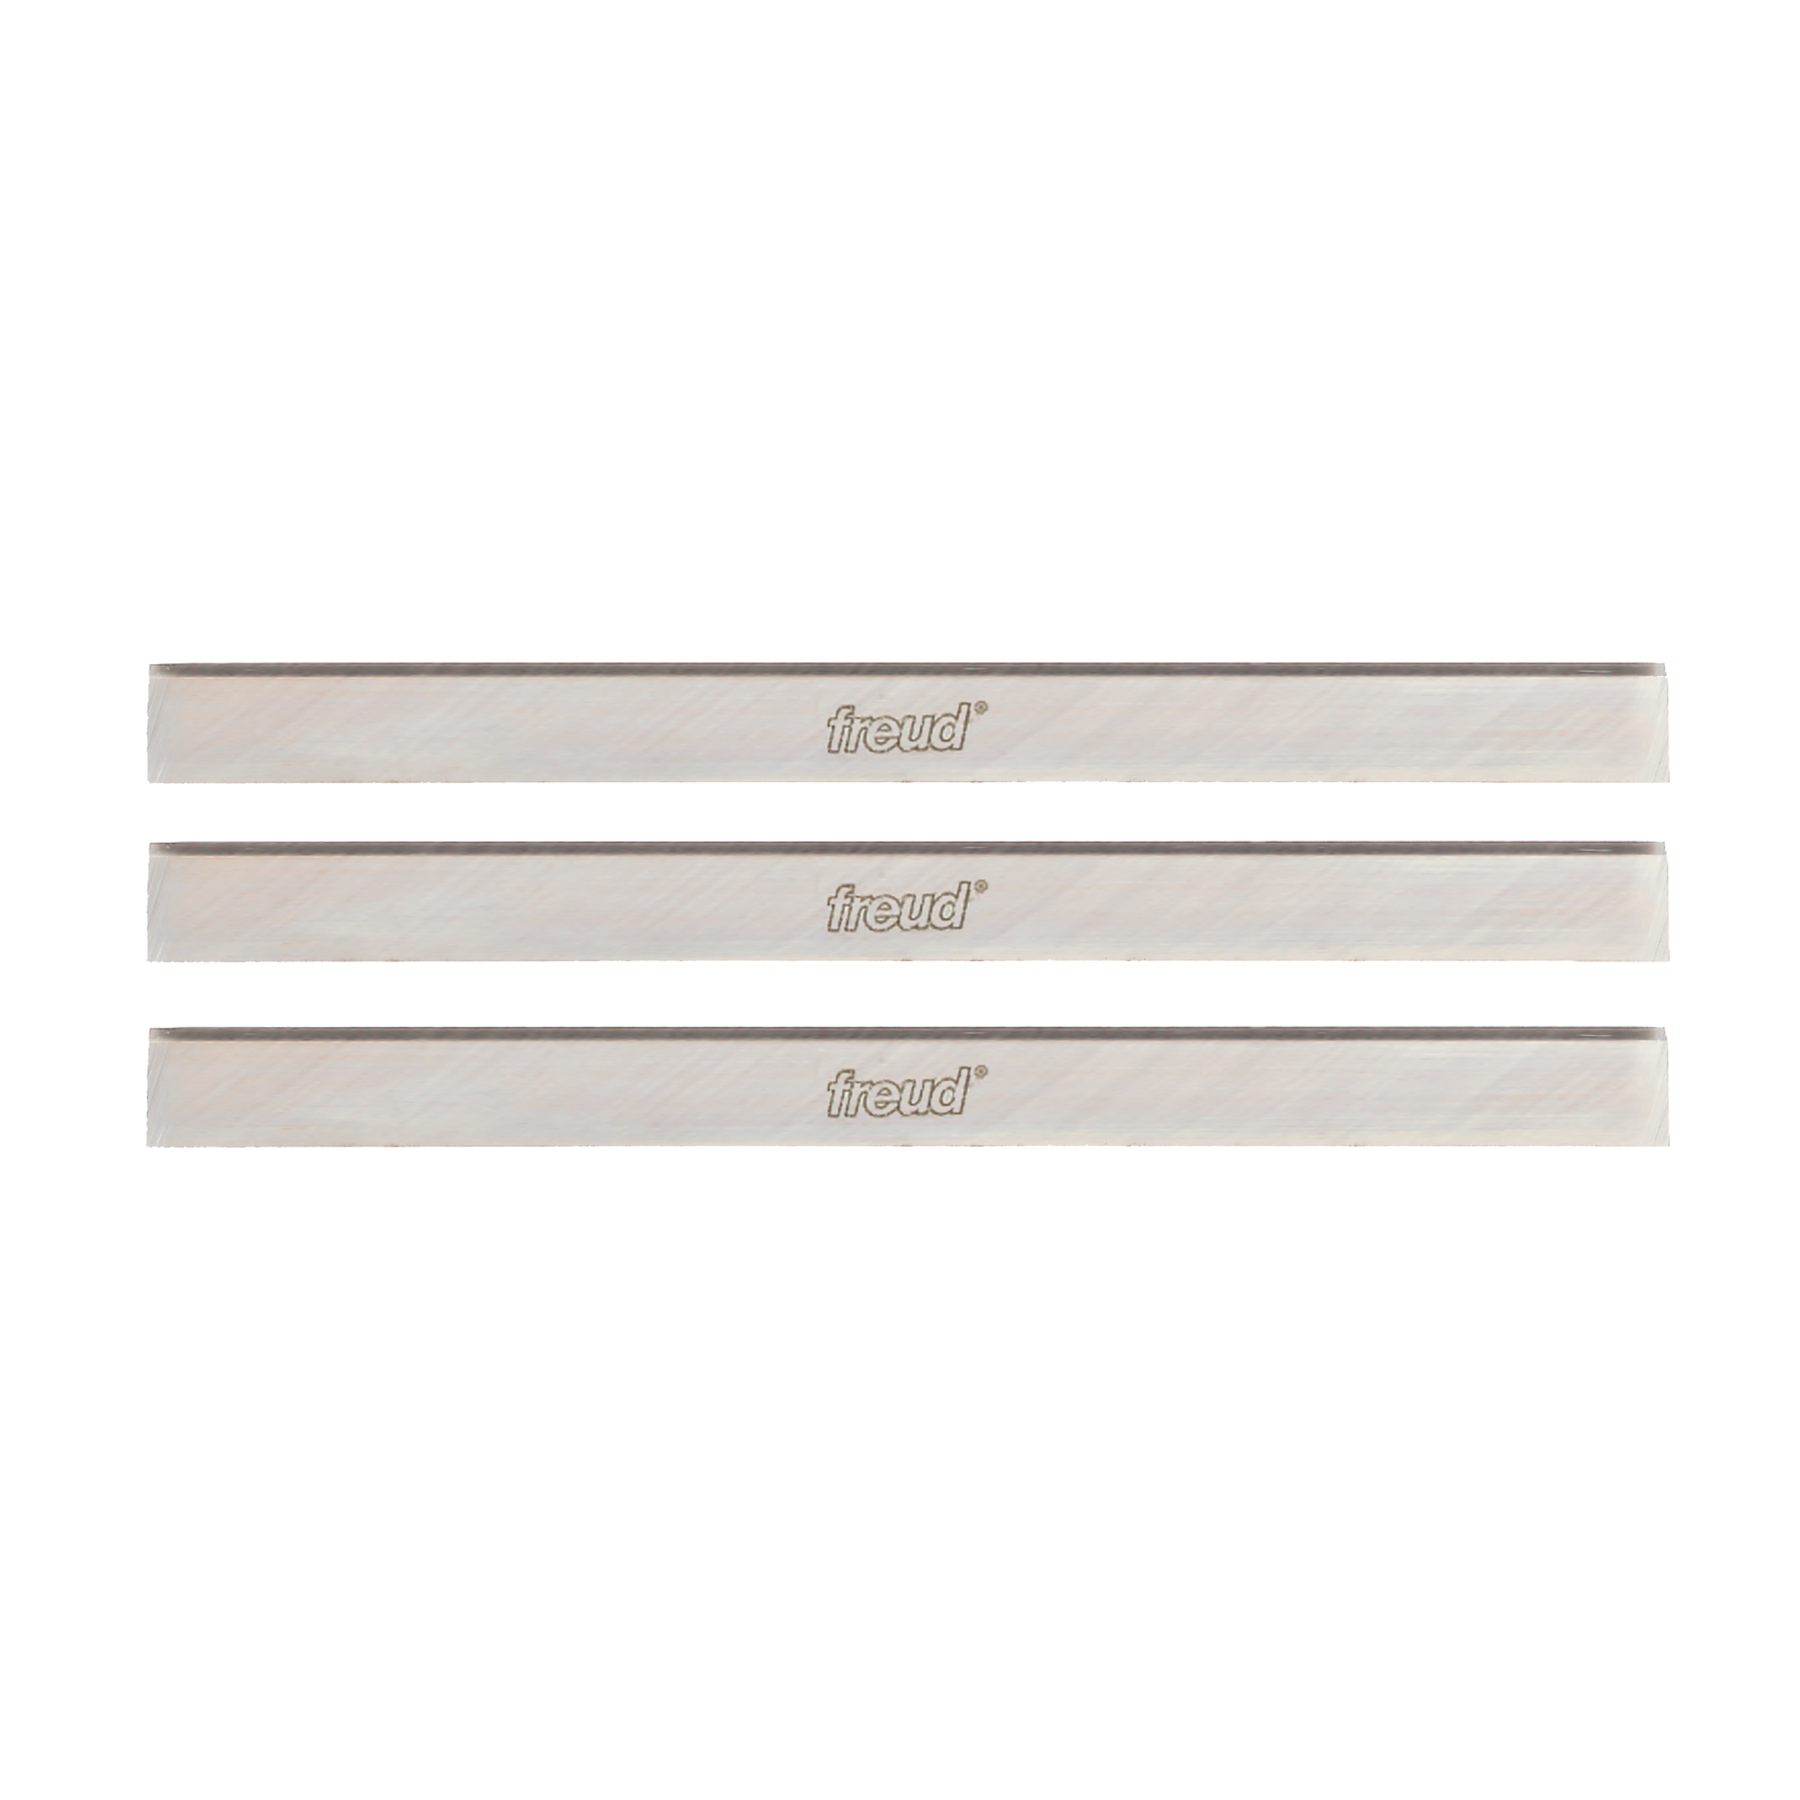 Freud 10” to 19” Length Knives Inserts